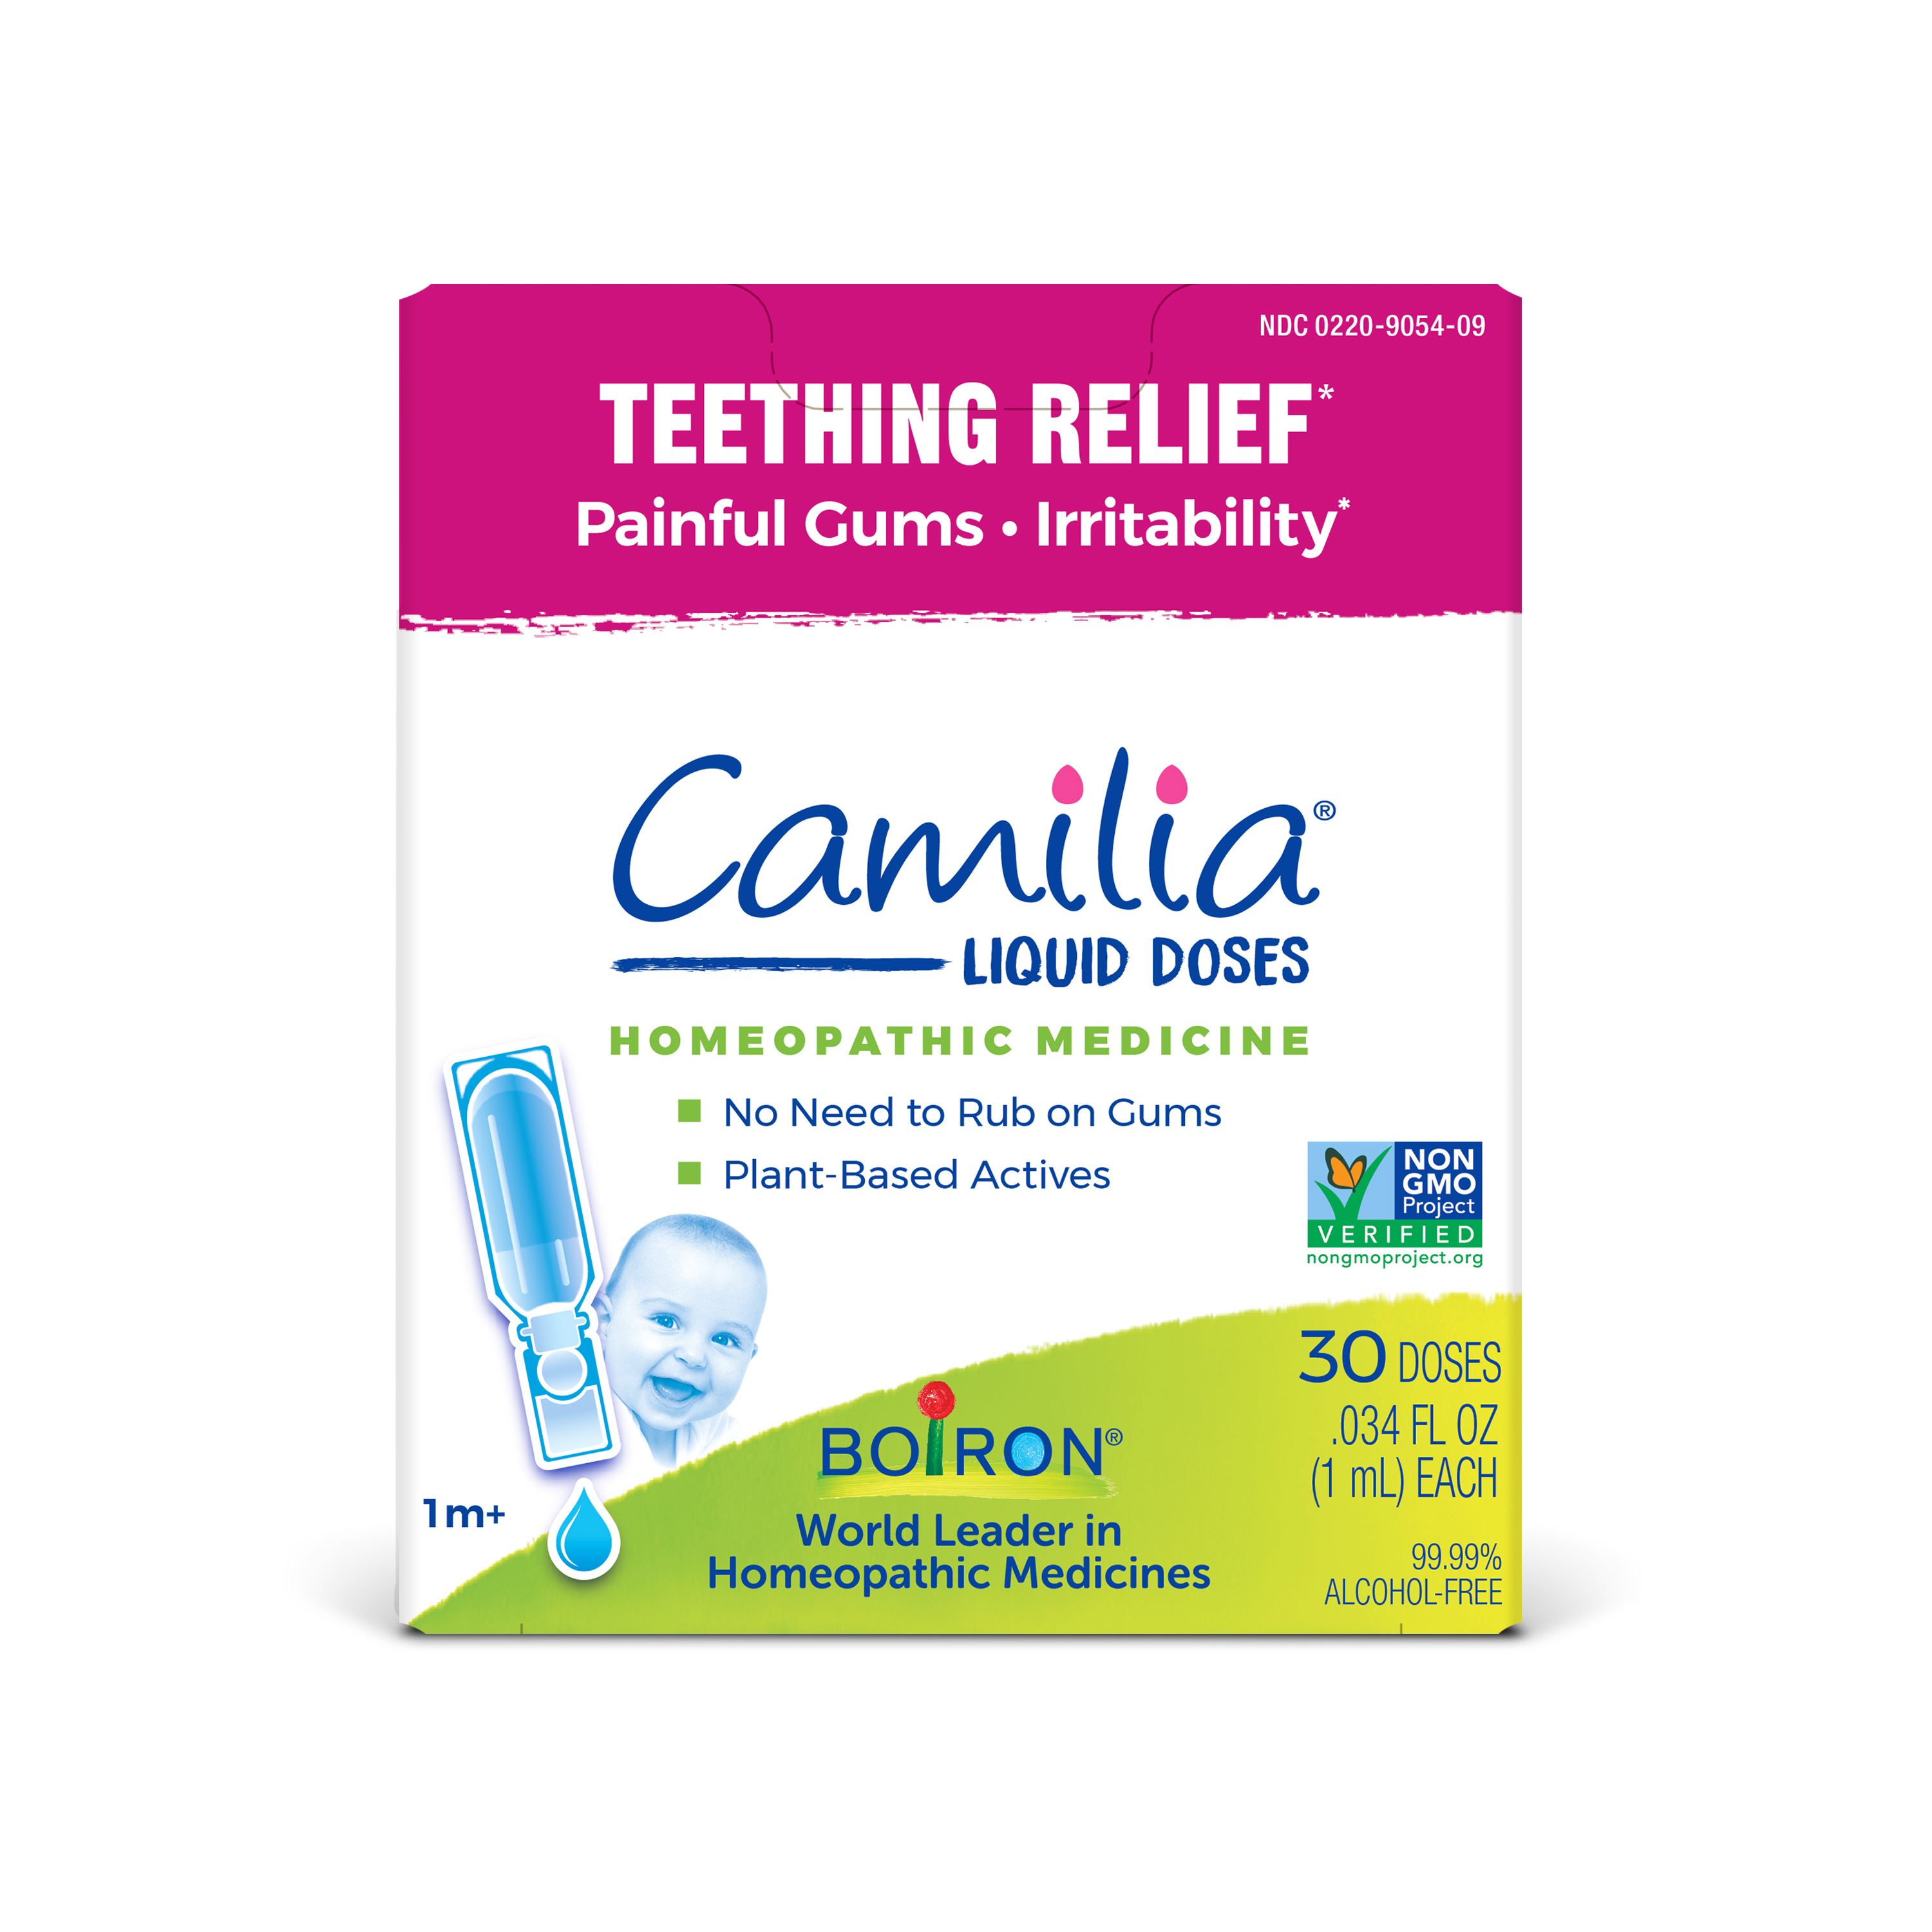 Boiron Camilia, Homeopathic Medicine for Teething Relief, 30 Single Liquid Doses - image 1 of 11